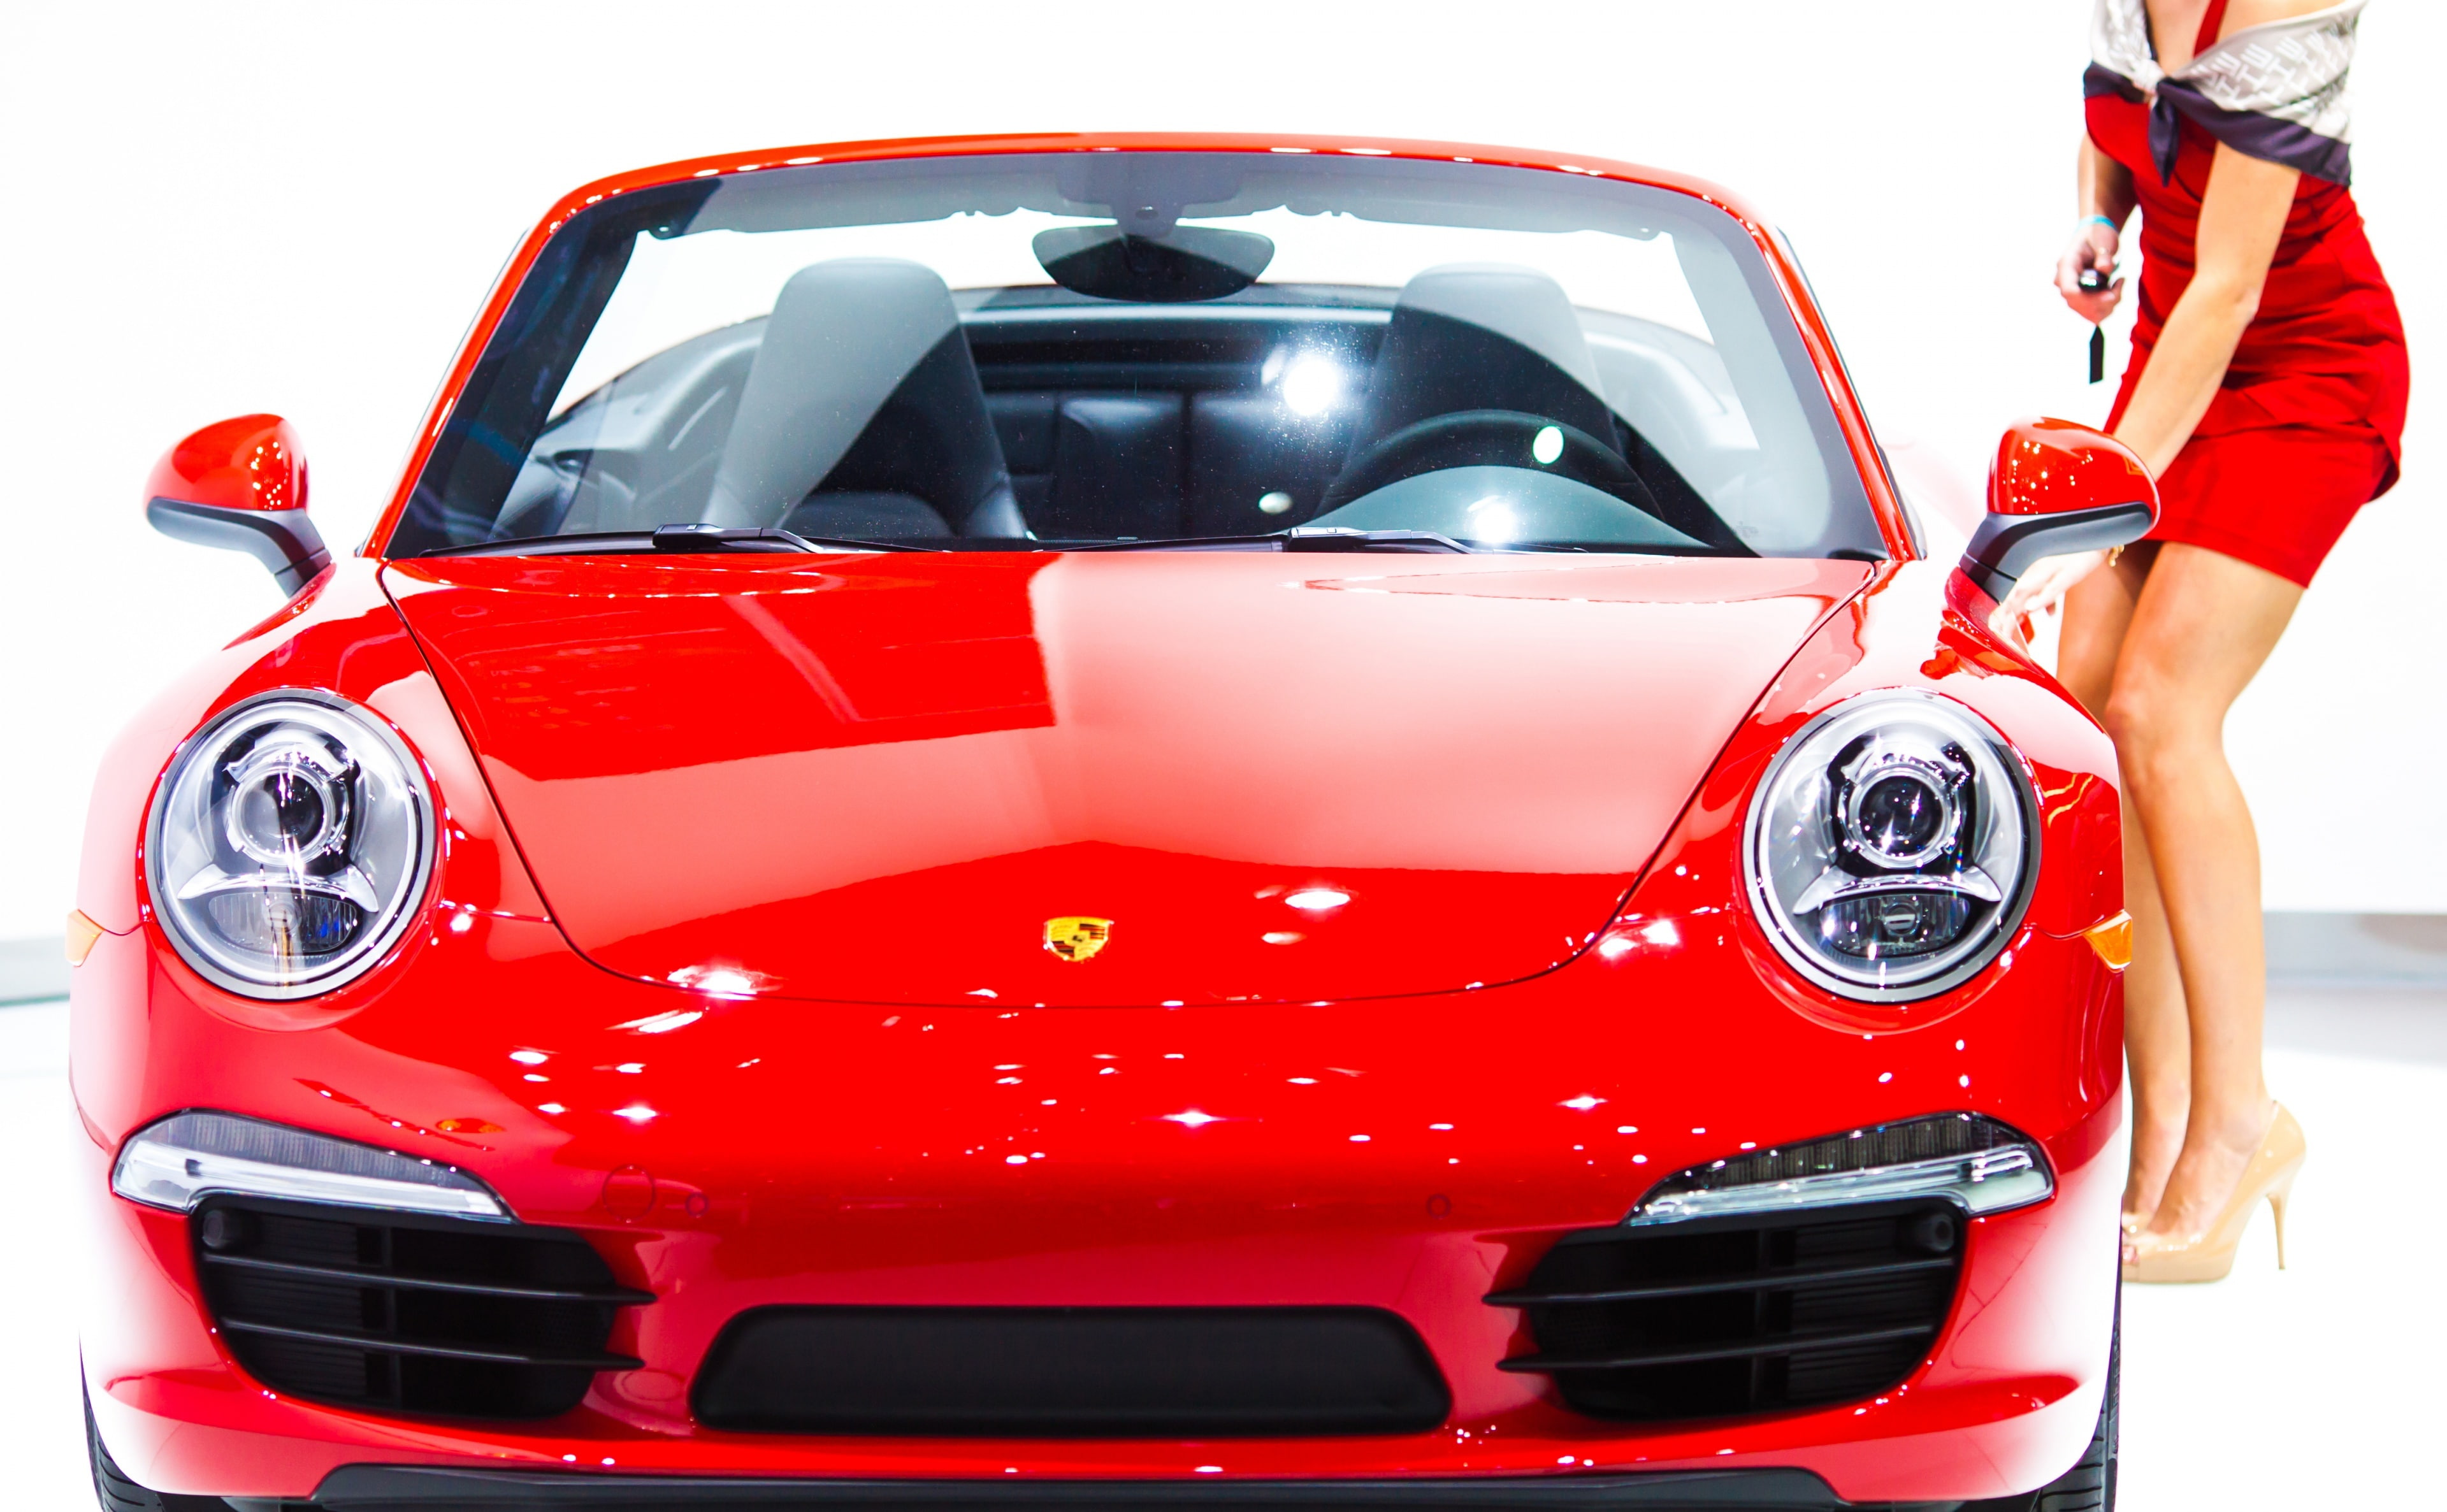 Apparently There's A New Porsche Coming Out, red Porsche Carrera convertible coupe